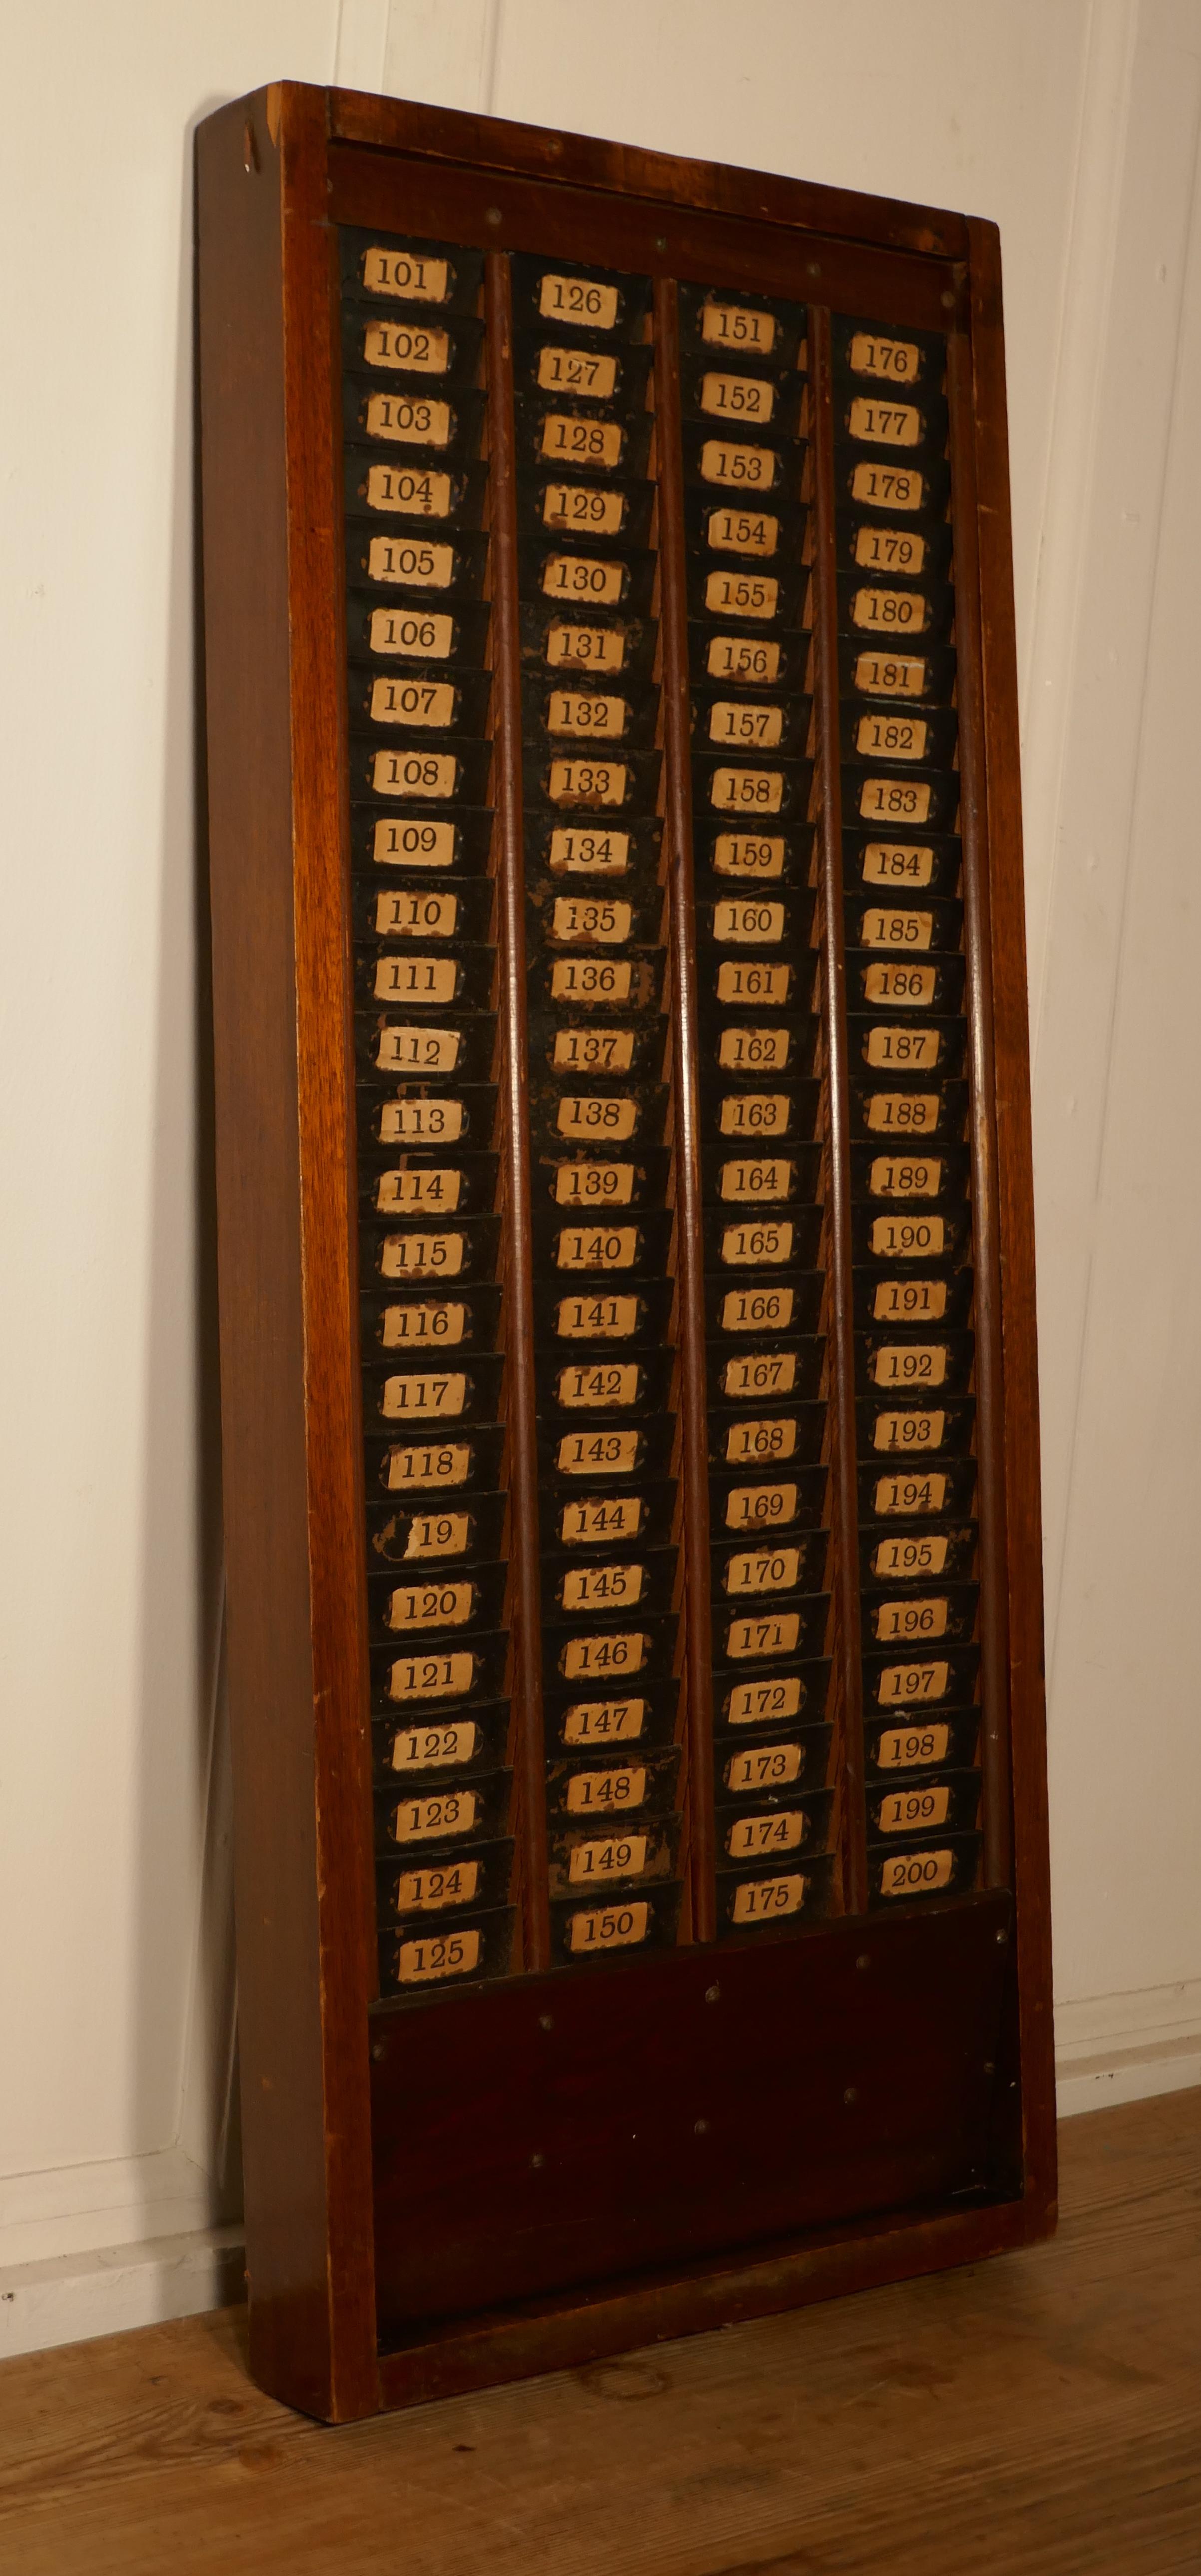 Mahogany clocking in time card rack

No longer in use but a great addition to Time Clock collectors the rack is set in a mahogany case and the metal card dividers are all numbered from 101-200

In good sound condition with hanging brackets on